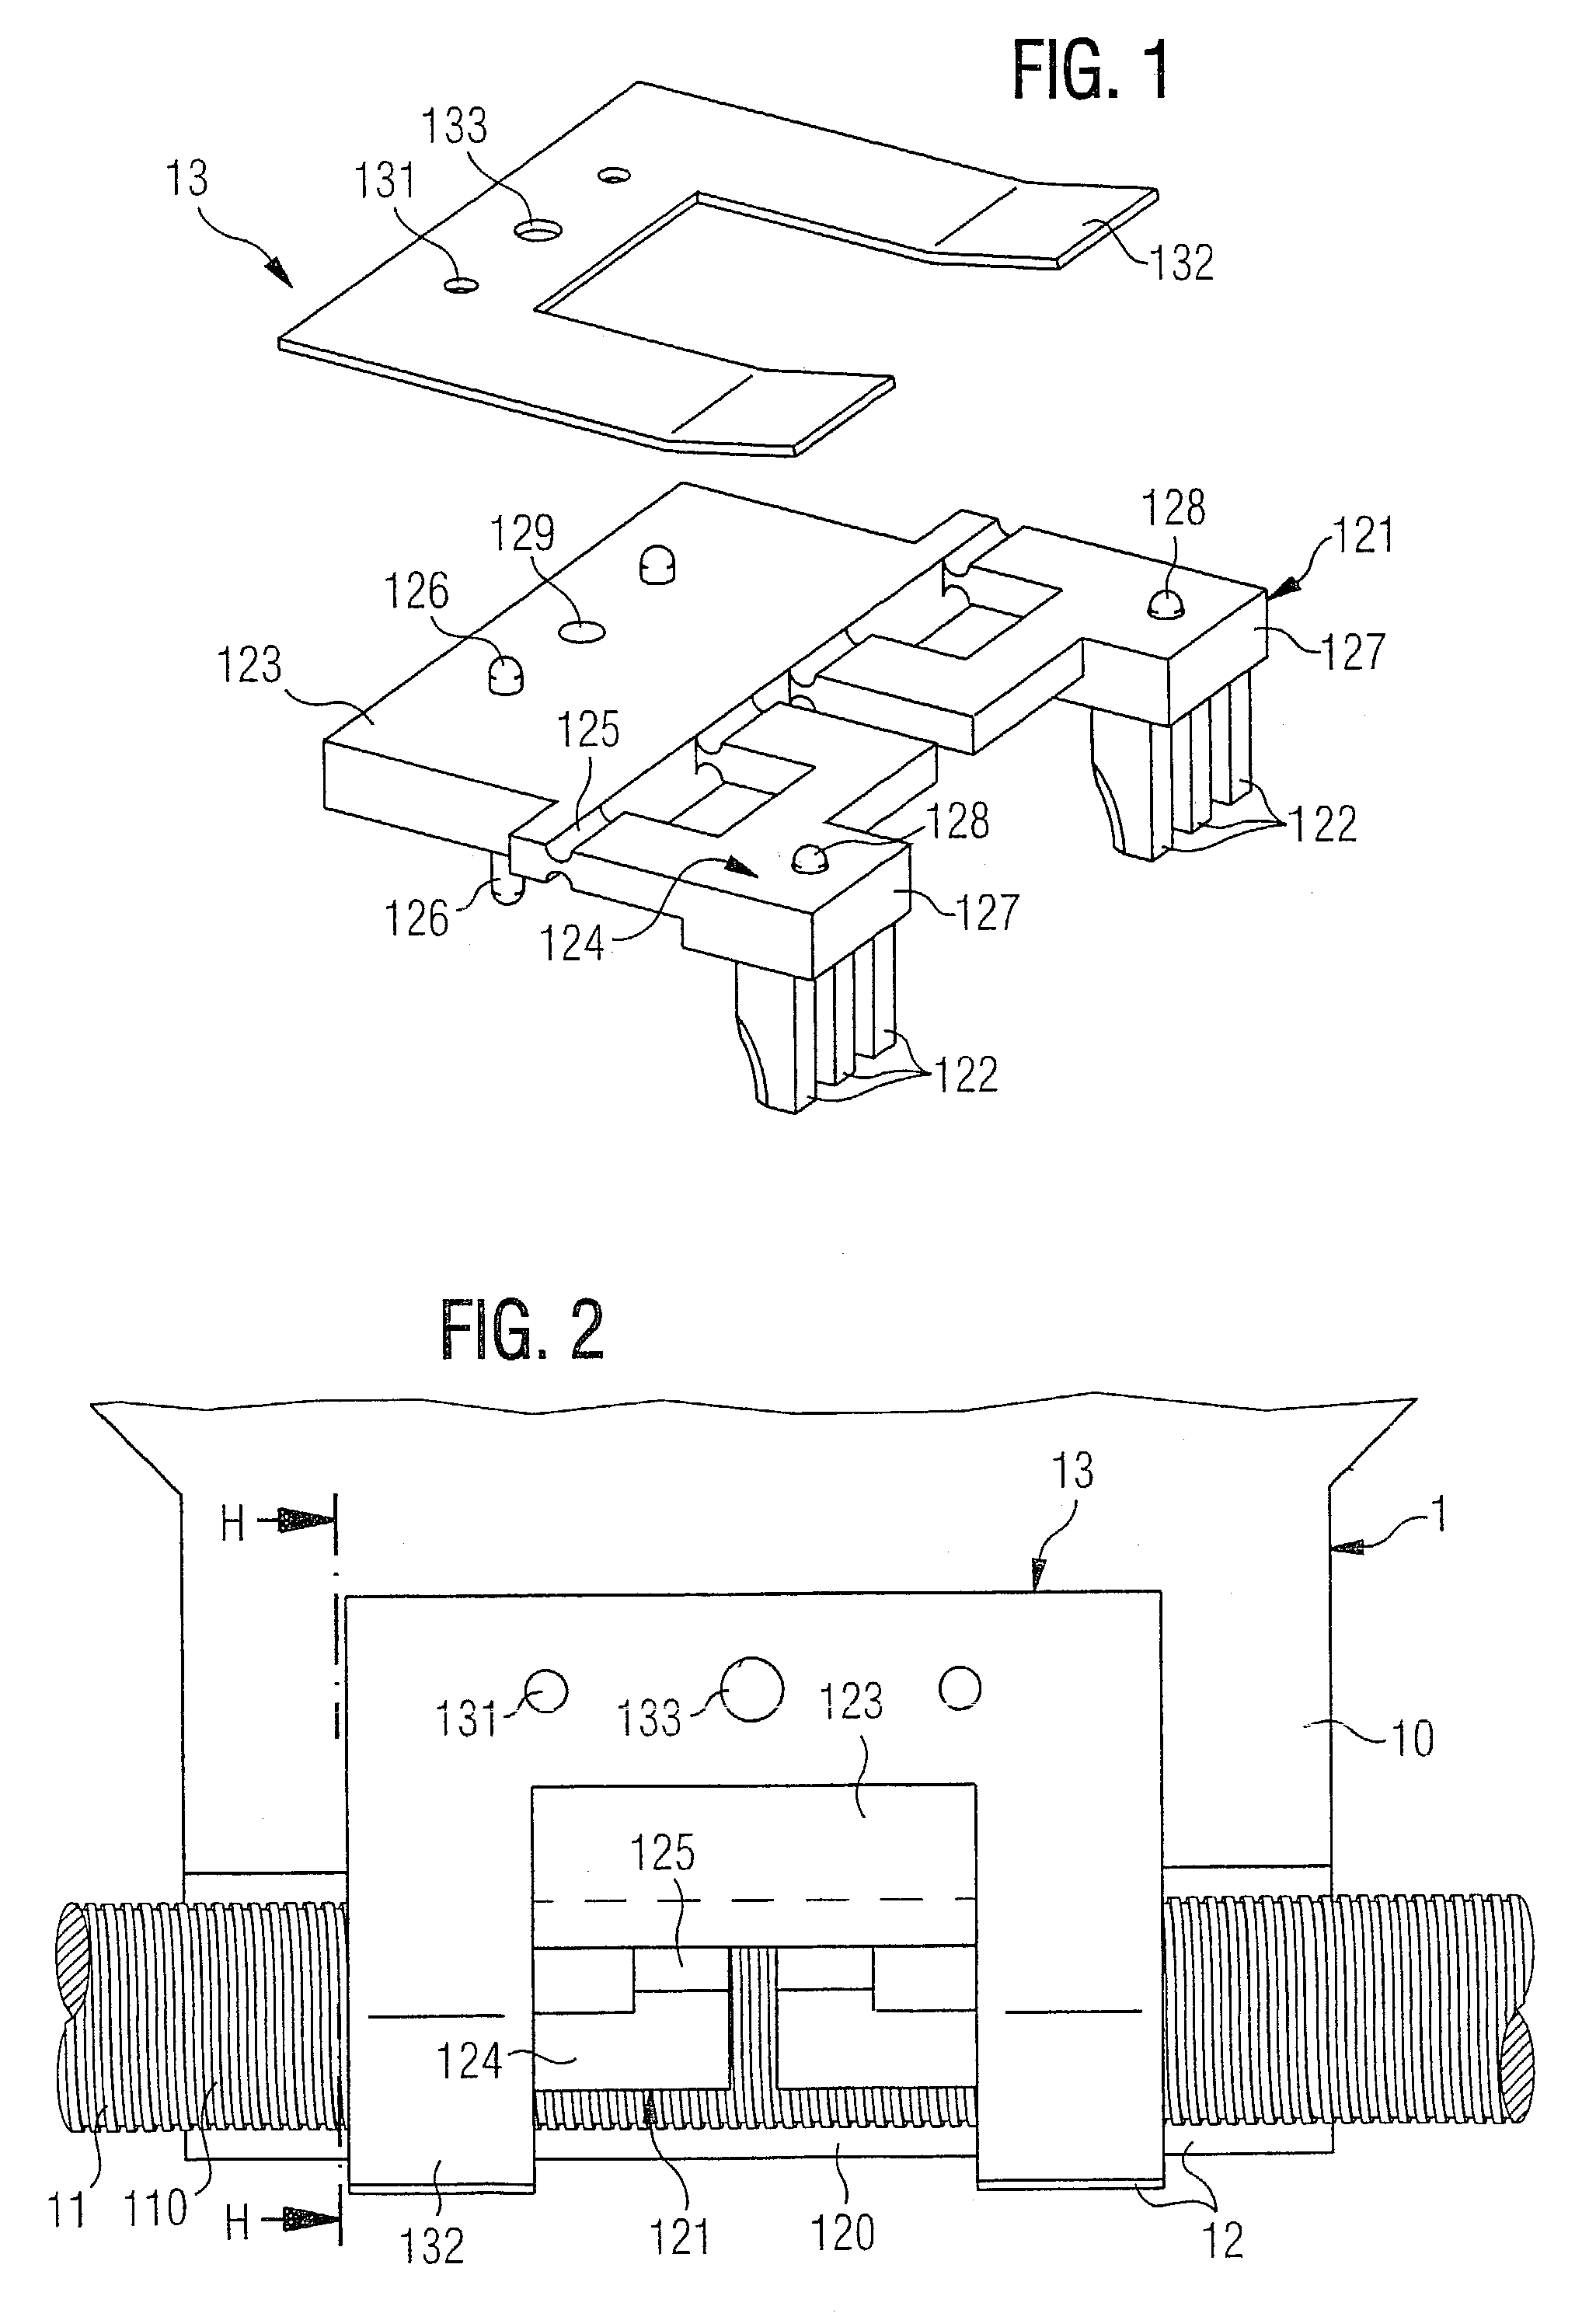 Guidance of an optical scanning device